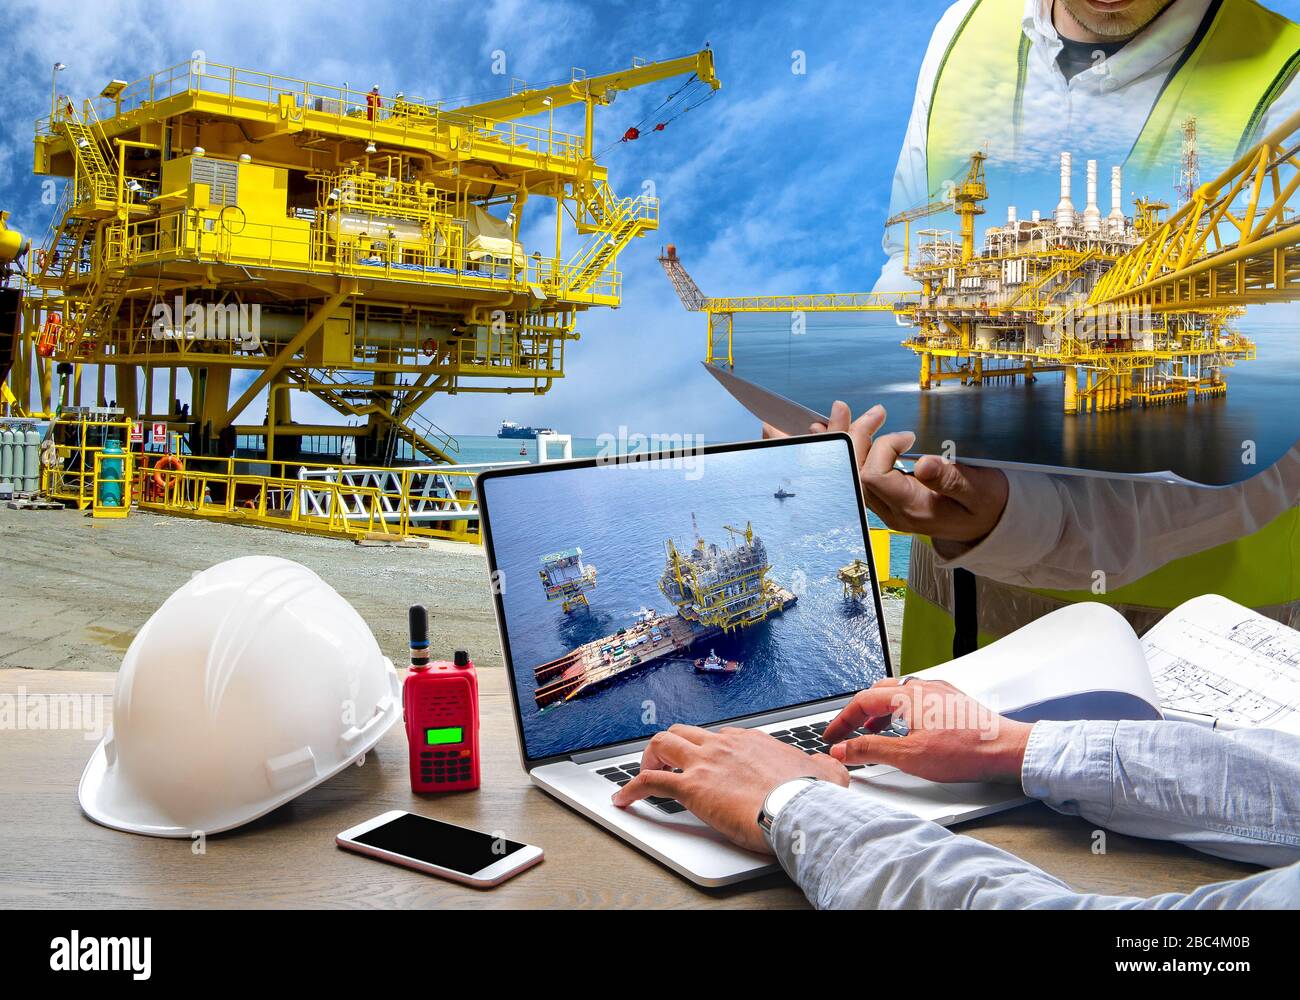 Drilling rig construction and transportation industry for installation Offshore, Manufacturing industrial and Worker equipment safety concept image Stock Photo